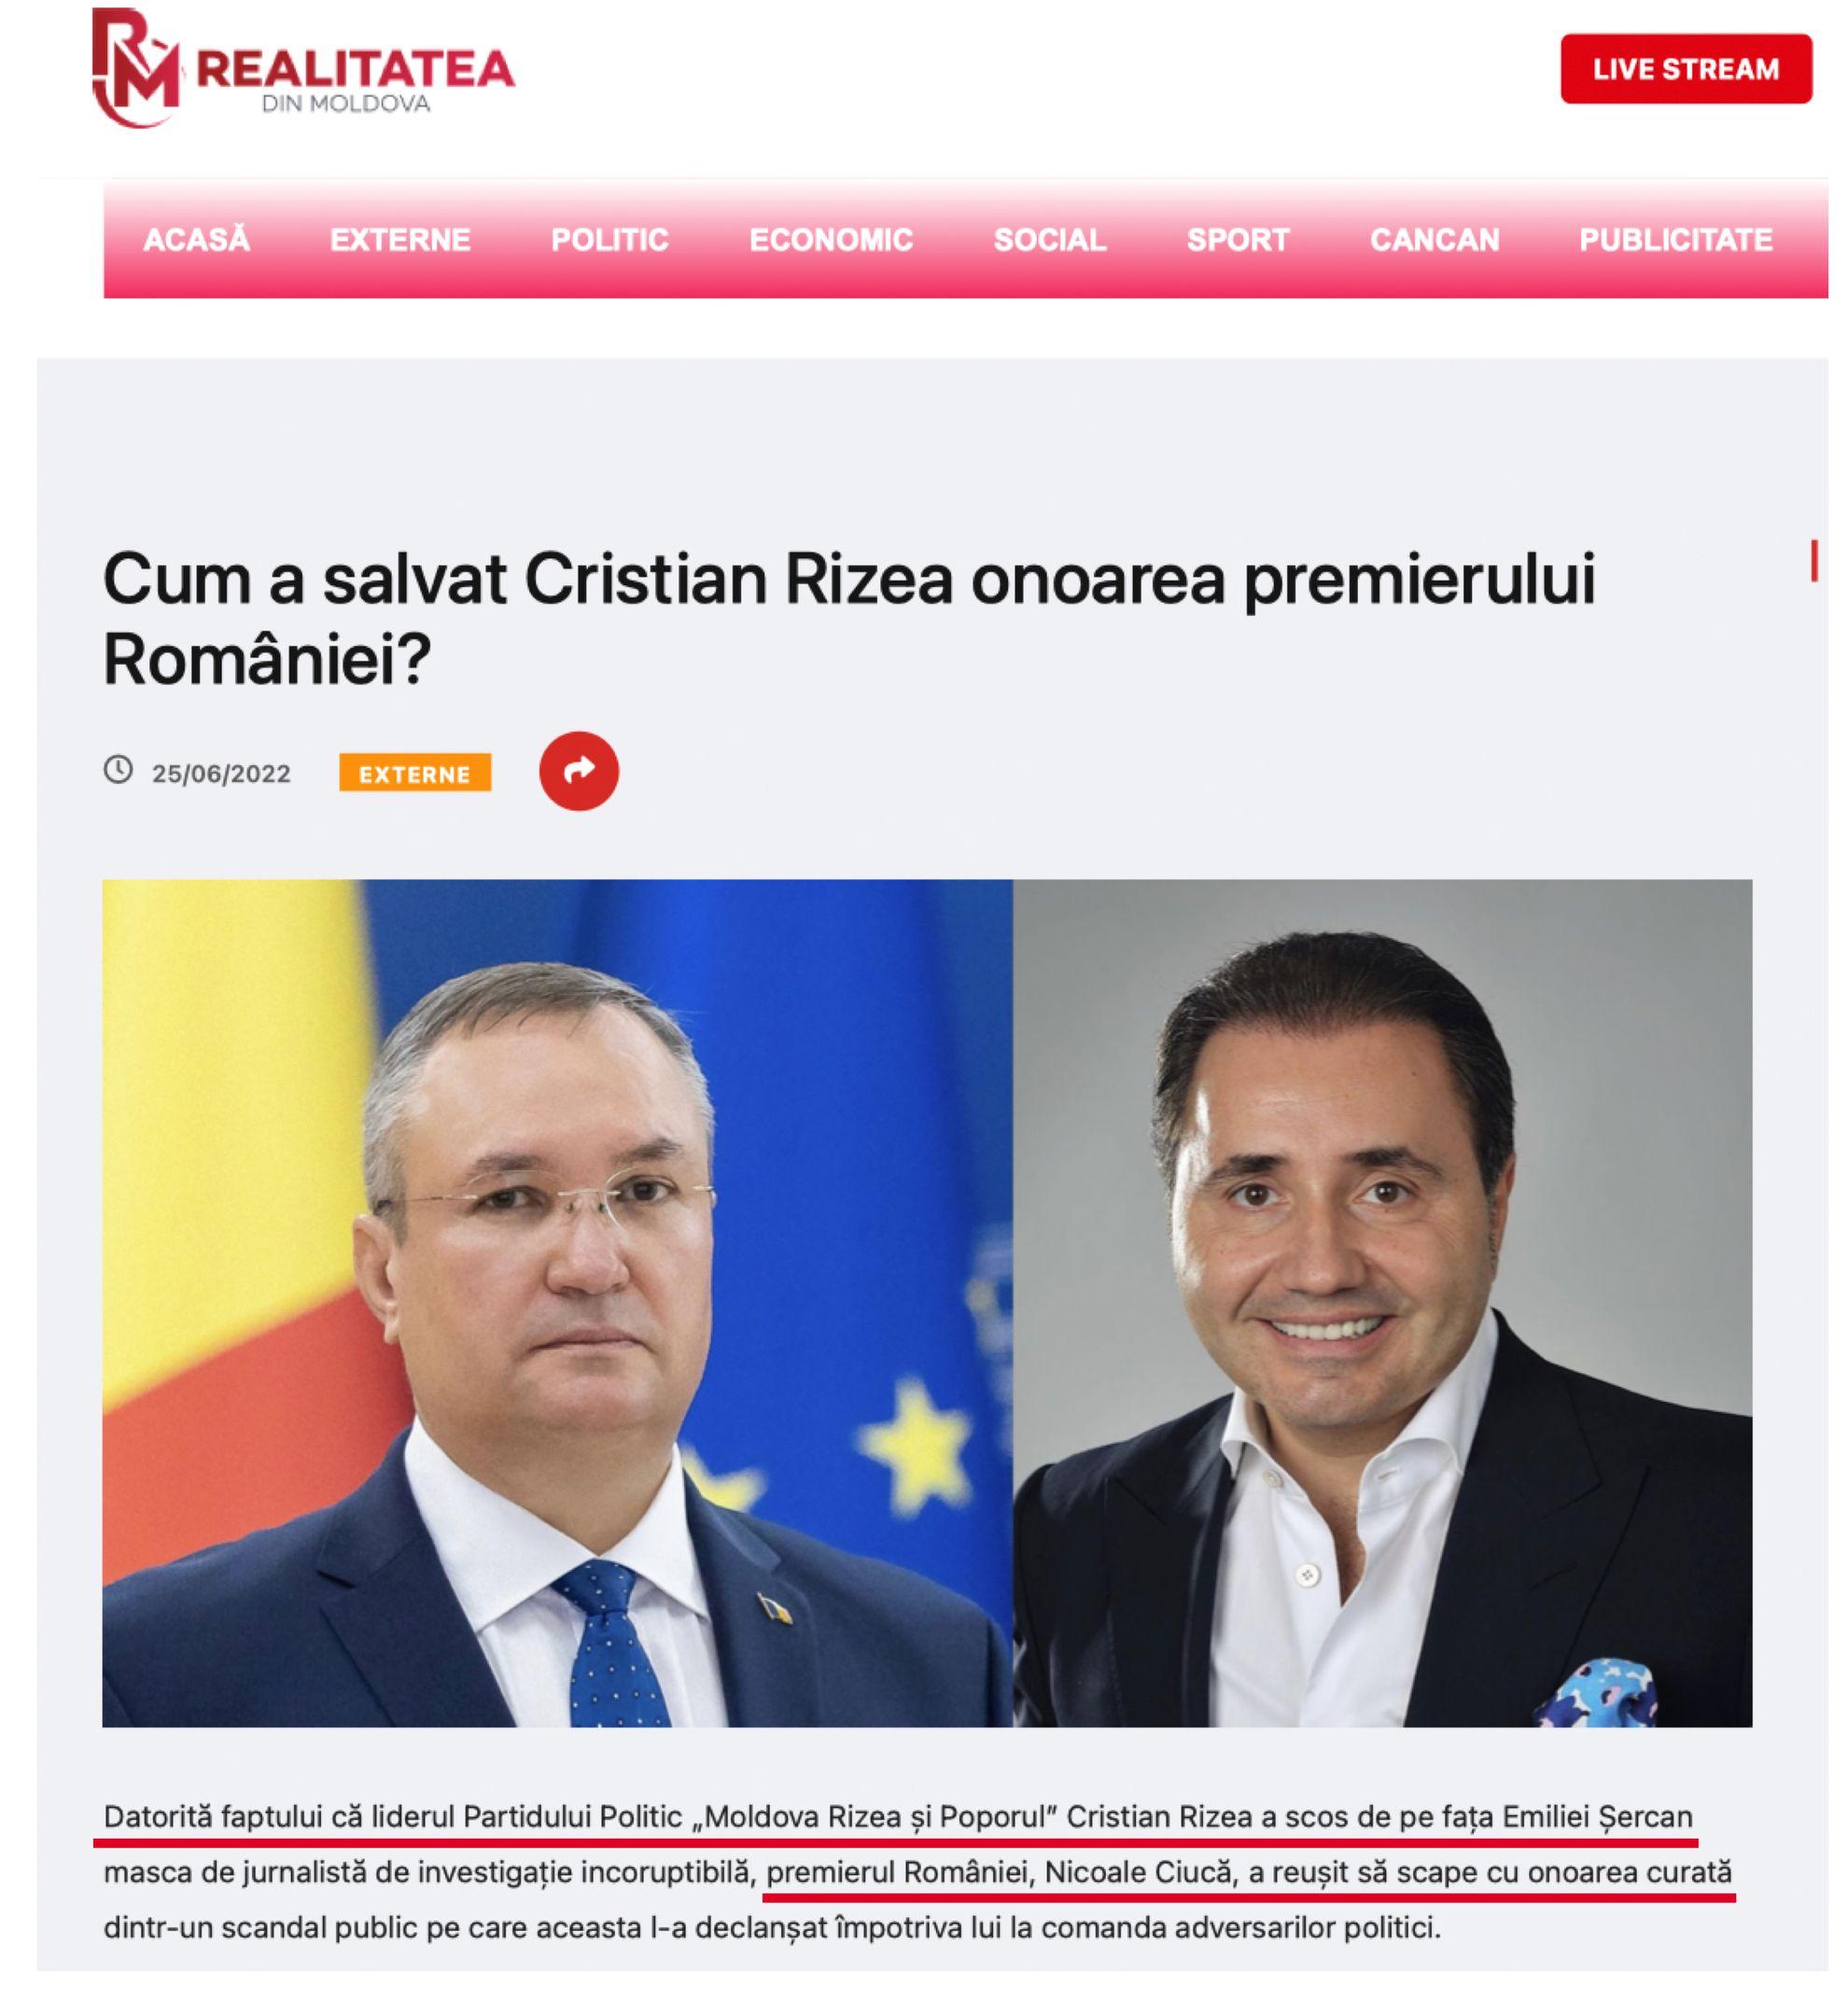 Screenshot from the website realitateadinmoldova[.]md, deactivated after owner Cristian Rizea was expelled from Moldova